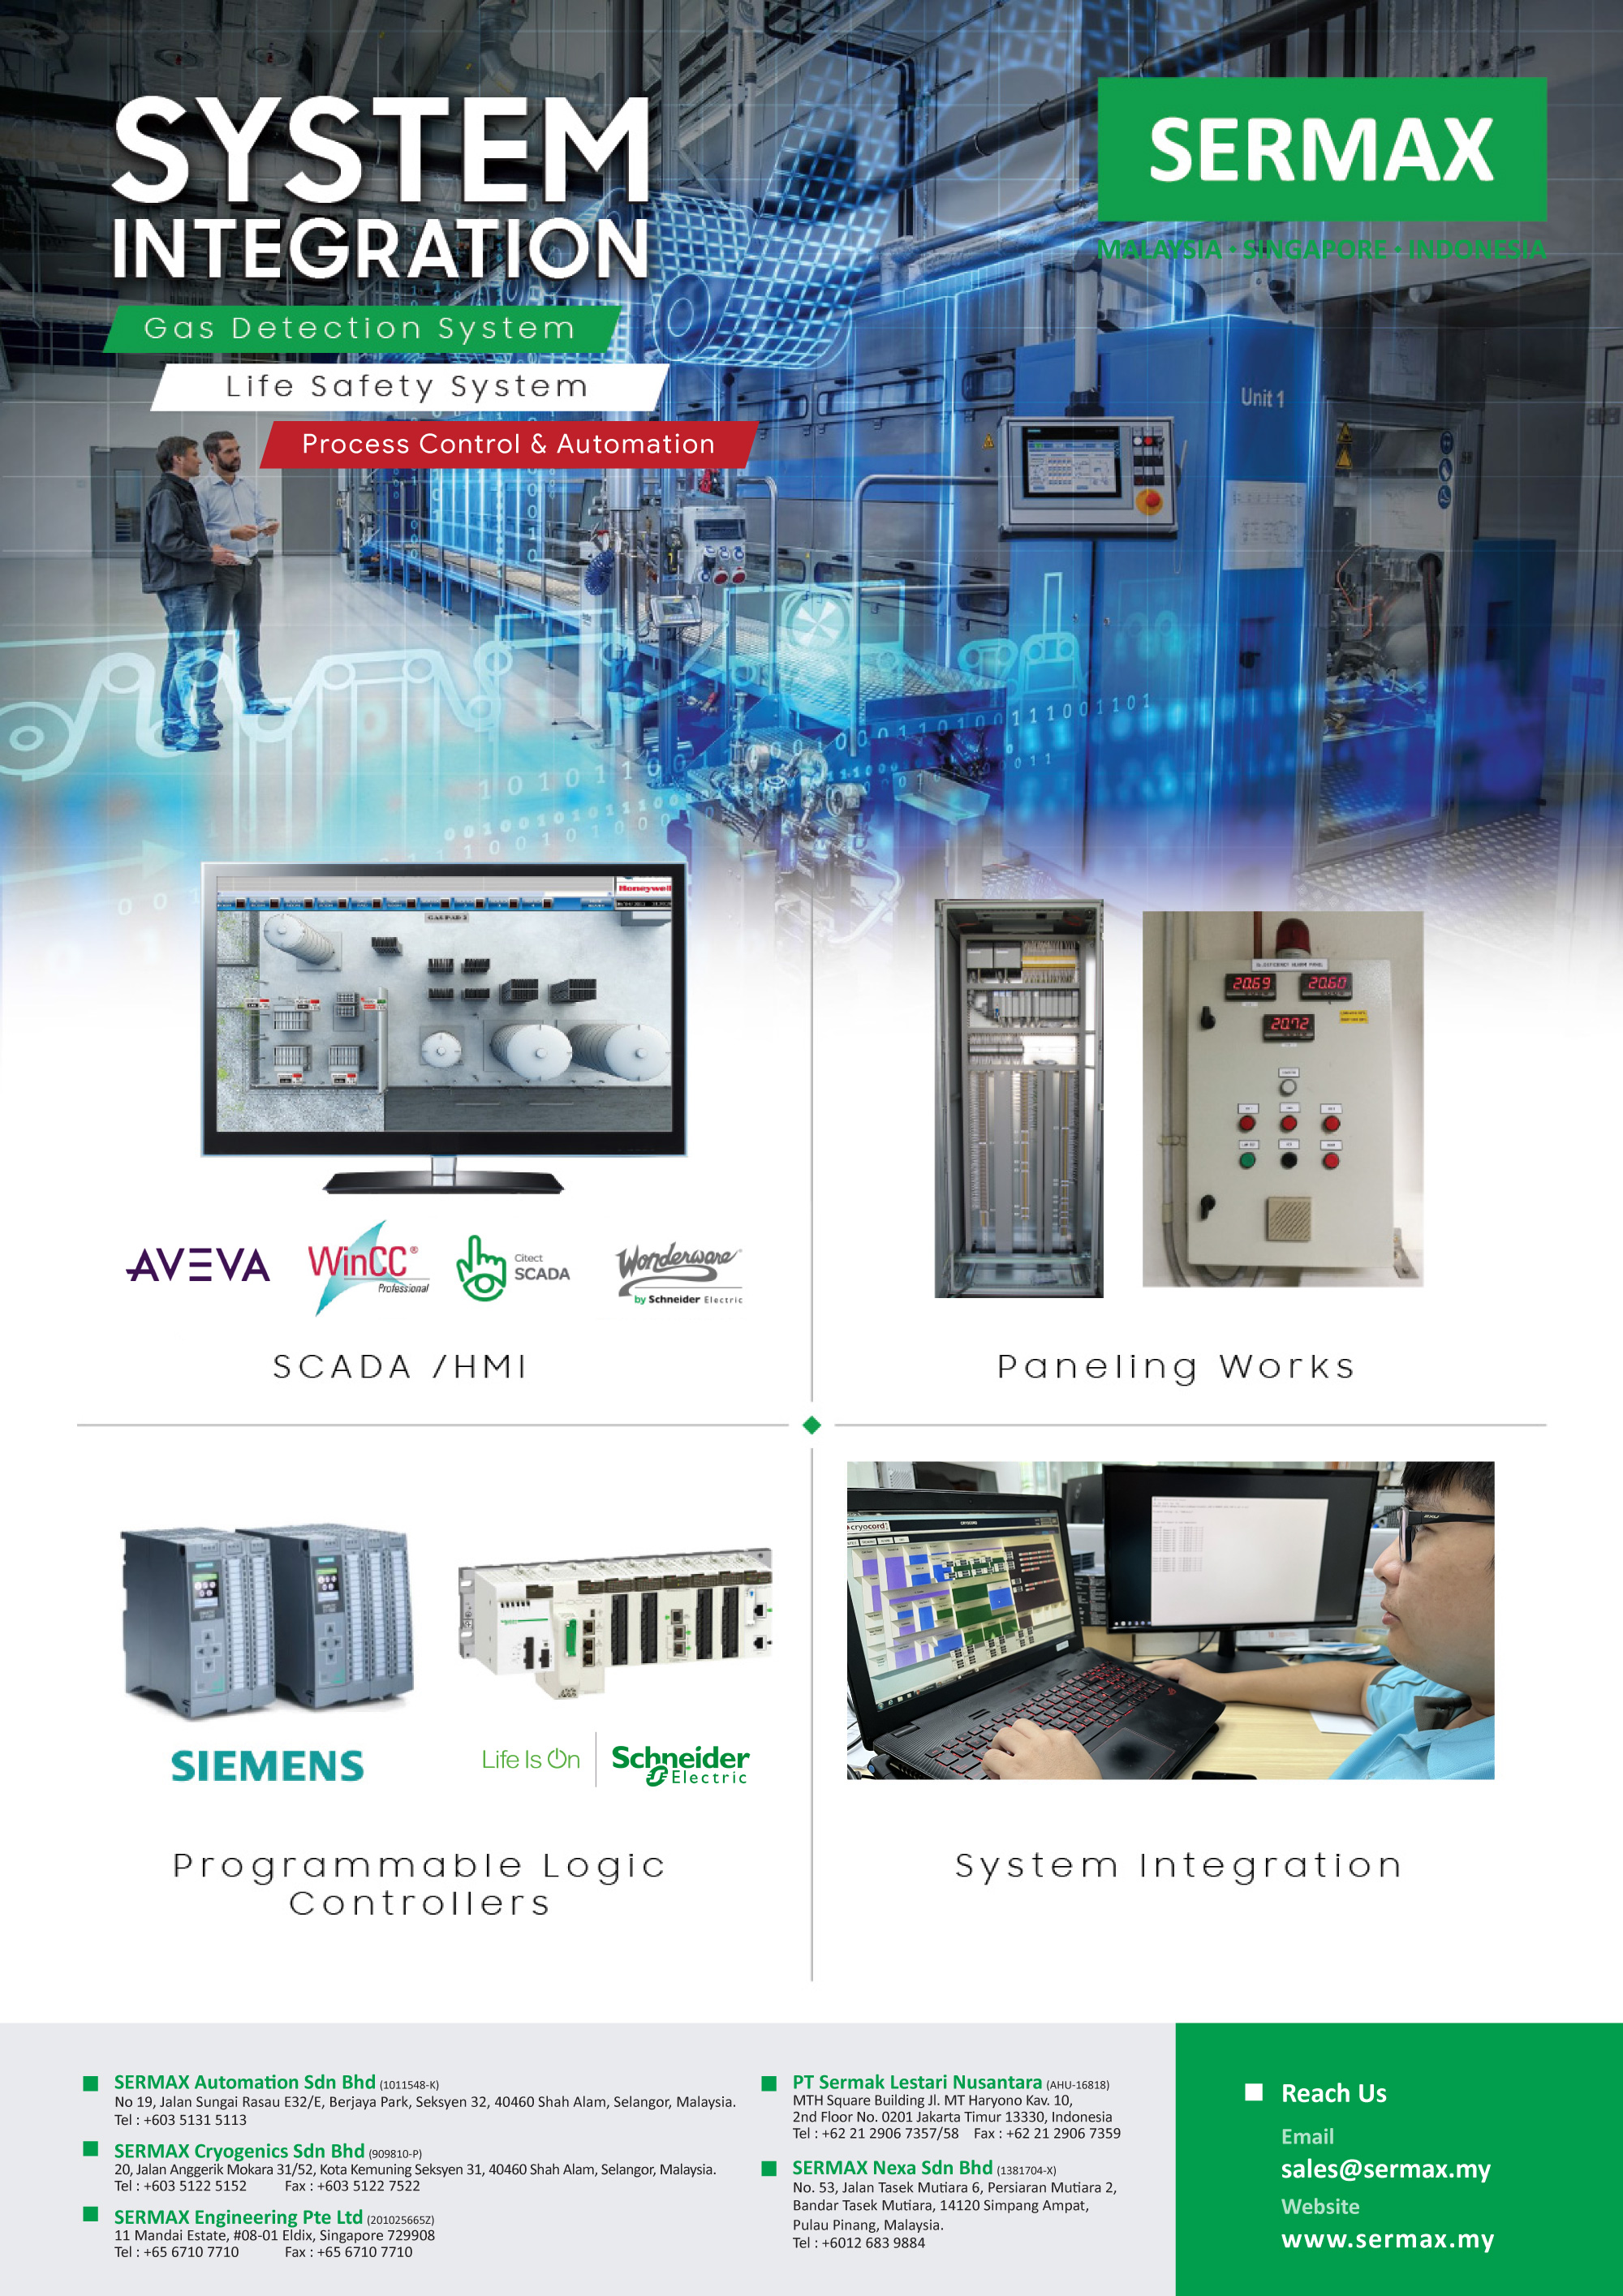 Sermax Automation Sdn Bhd Solution Offerings - Sermax Automation is able provide our engineering services in a total solutions that encompasses SCADA/HMI, PLC, Paneling work and Process Automation.